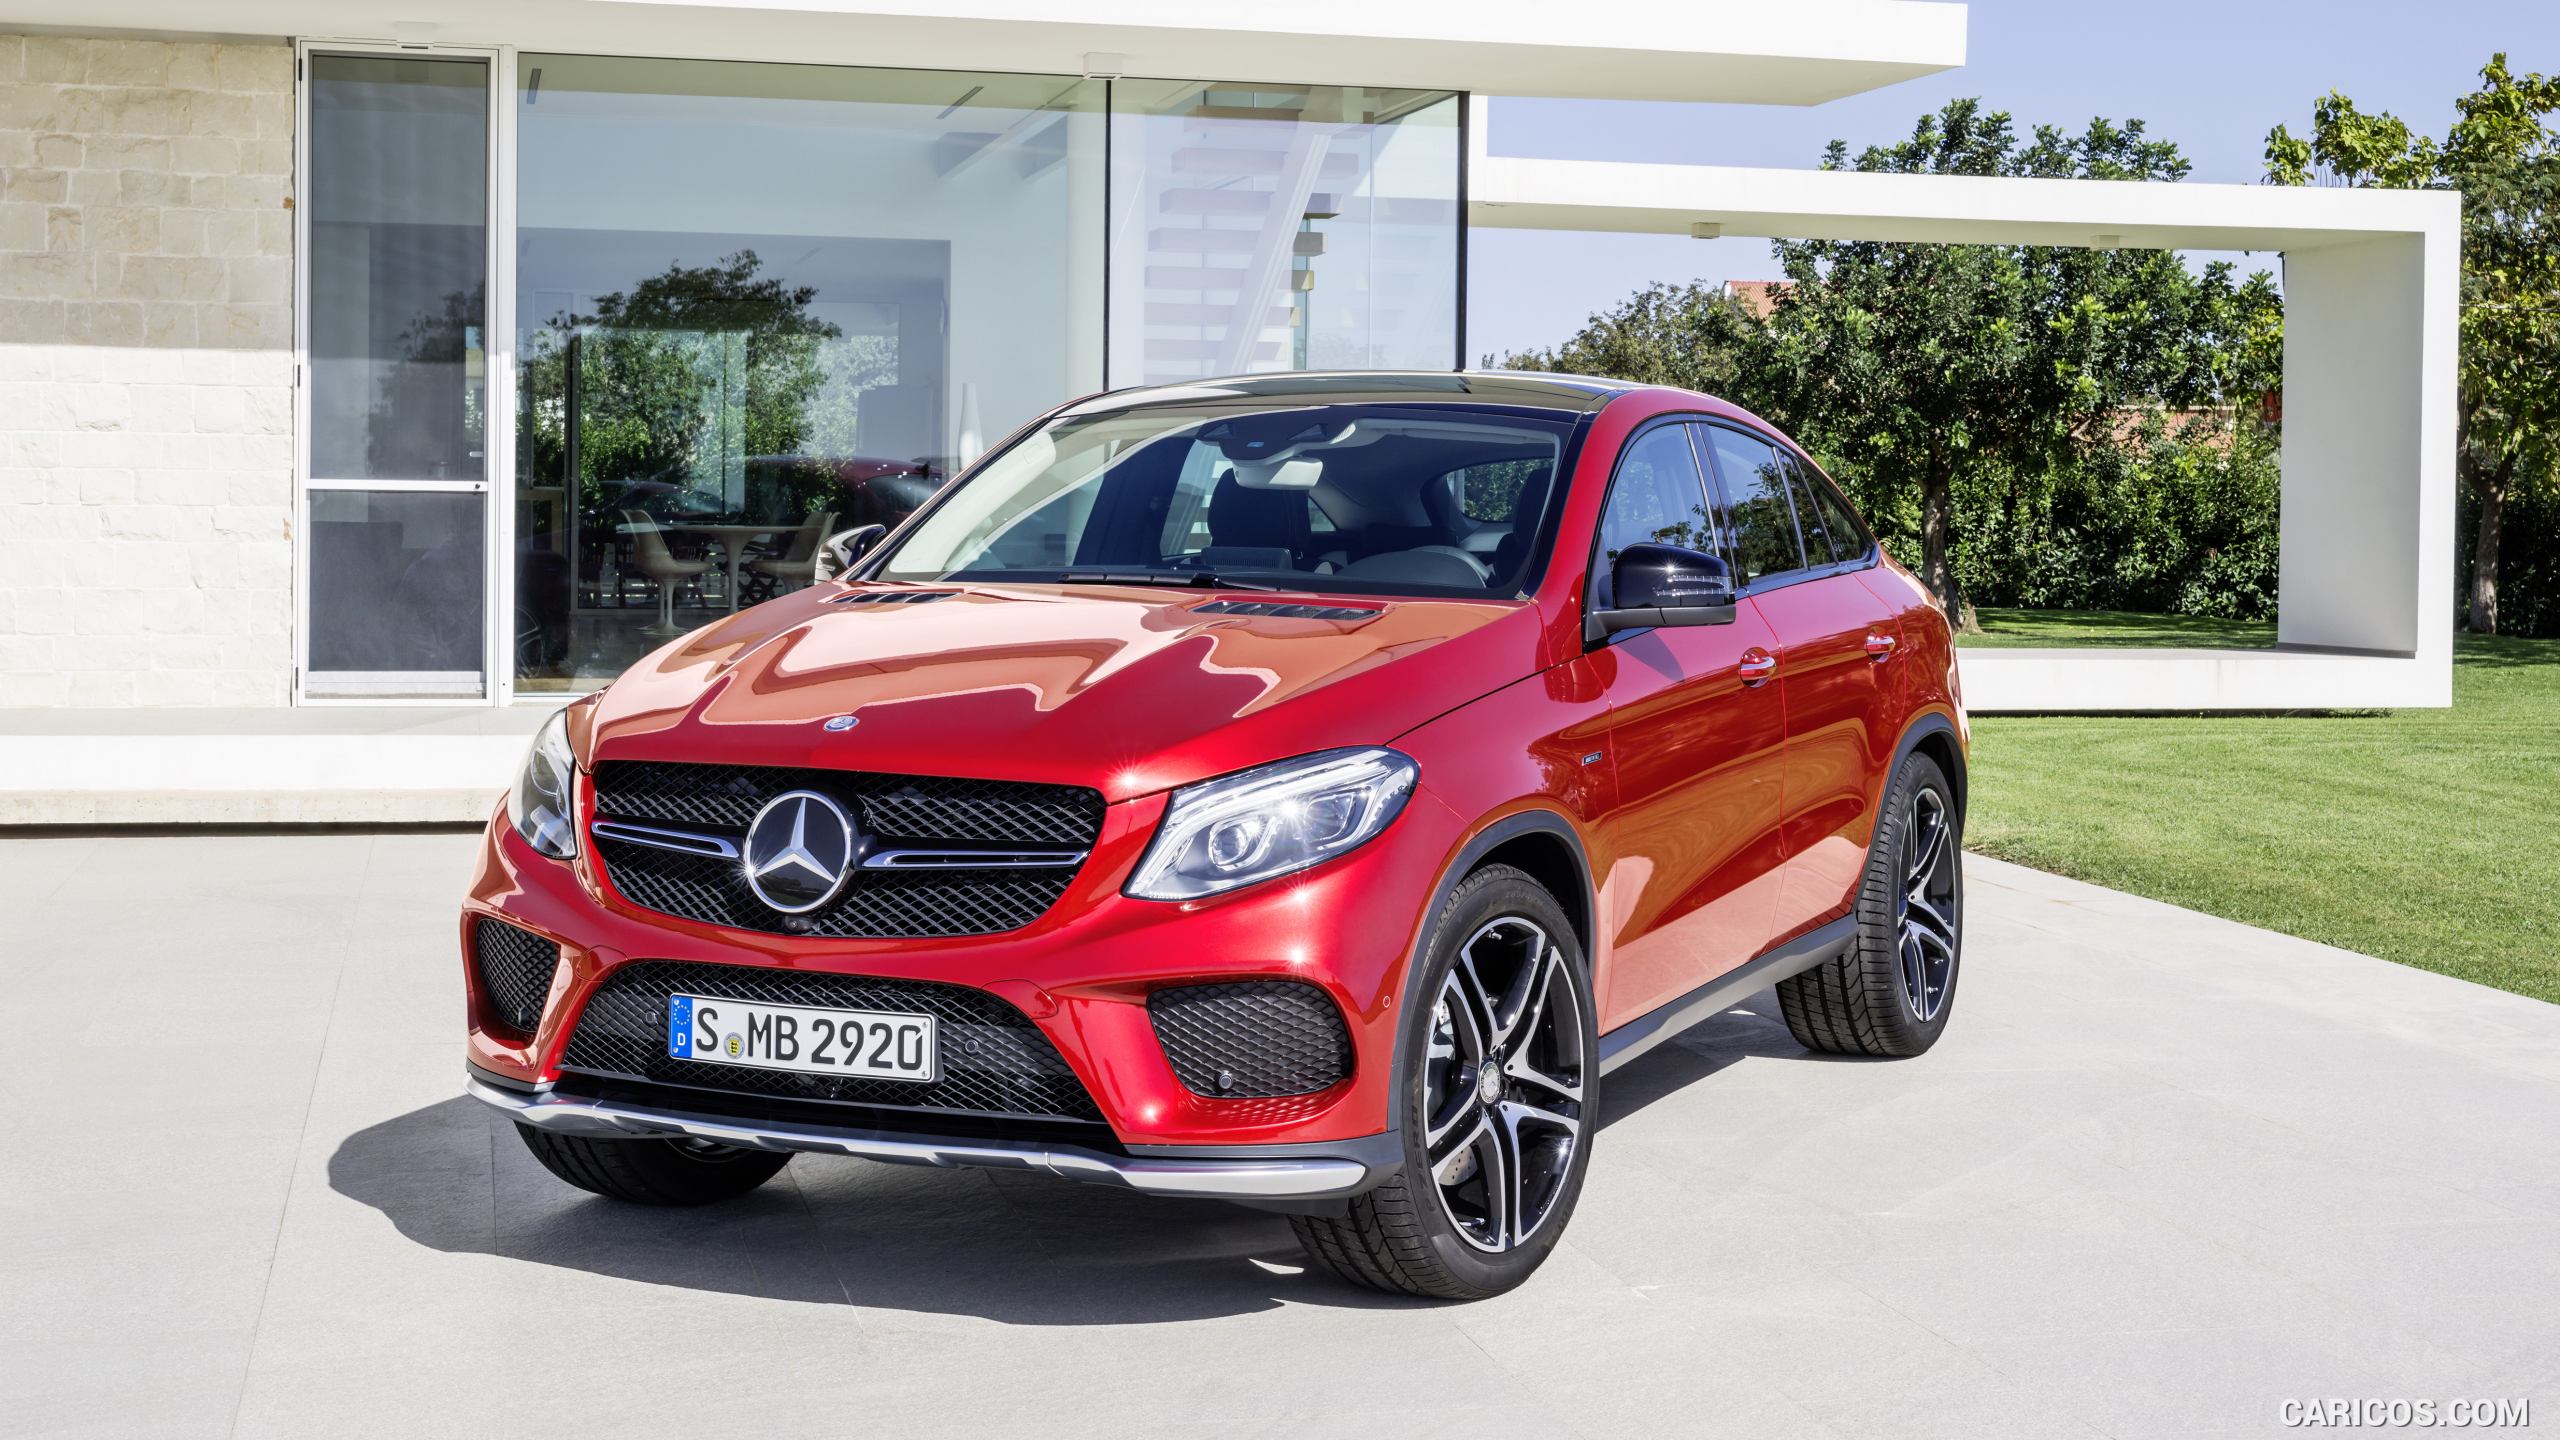 2016 Mercedes-Benz GLE 450 AMG Coupe 4MATIC (Designo Hyacinth Red Metallic) - Front, #5 of 115